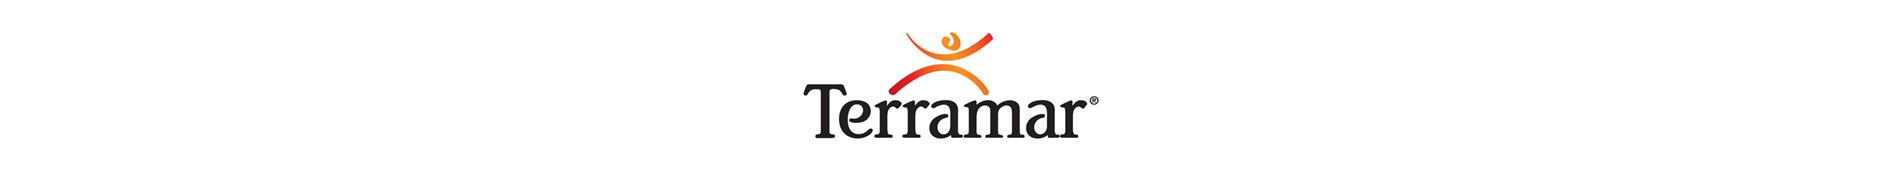 Terramar Products for Men, Women and Kids